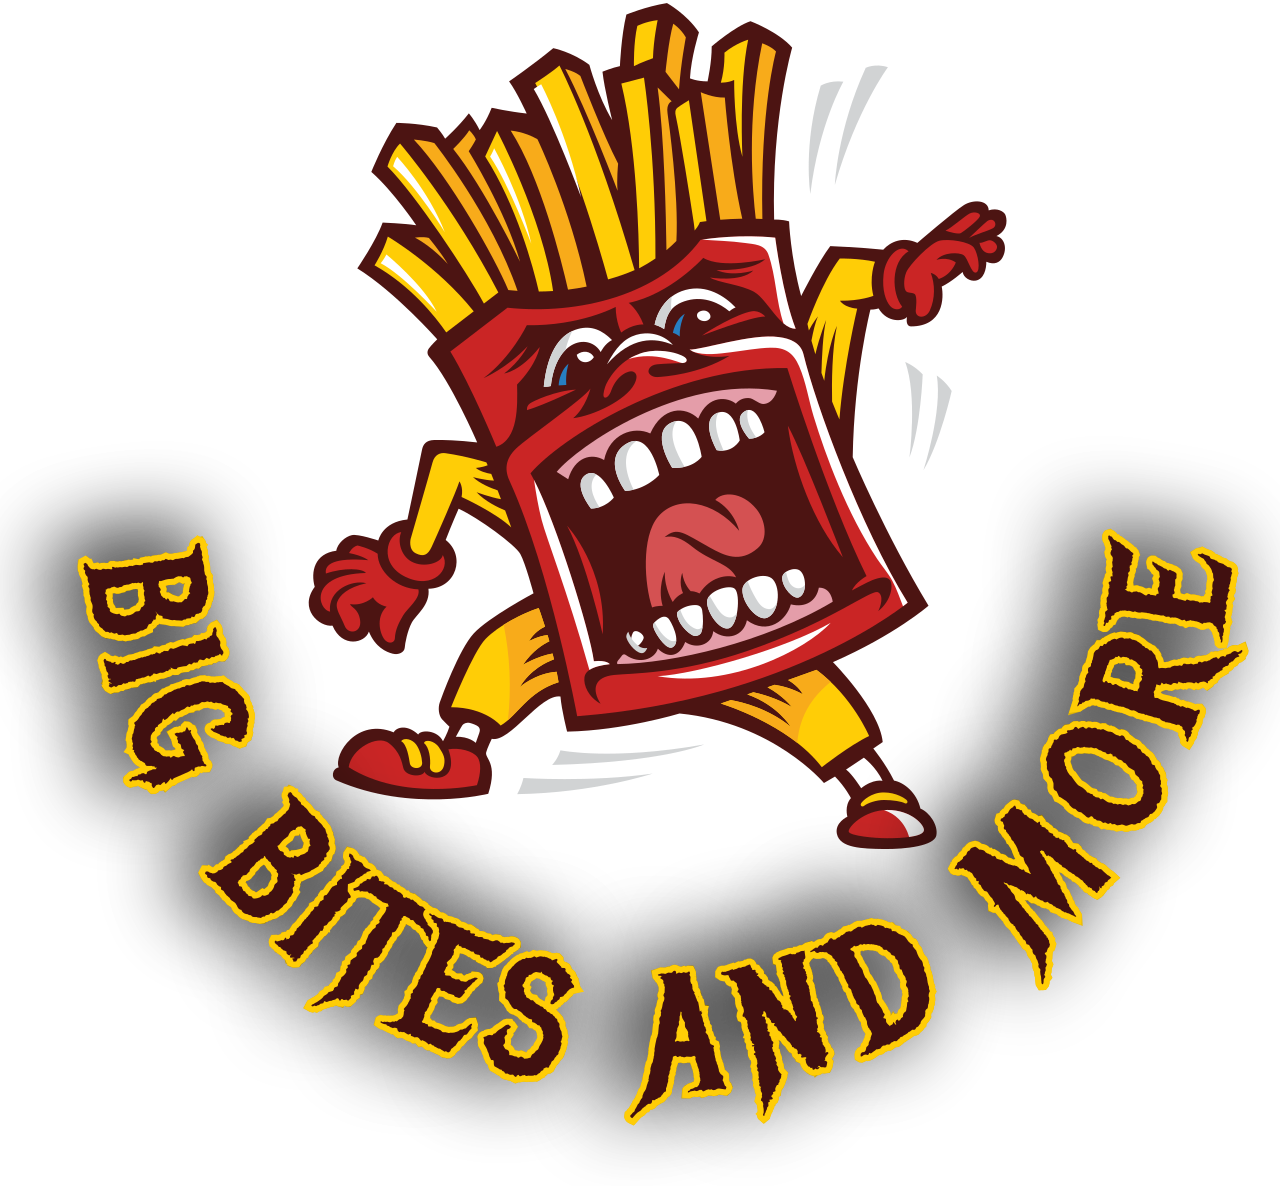 BIG BITES AND MORE's web page